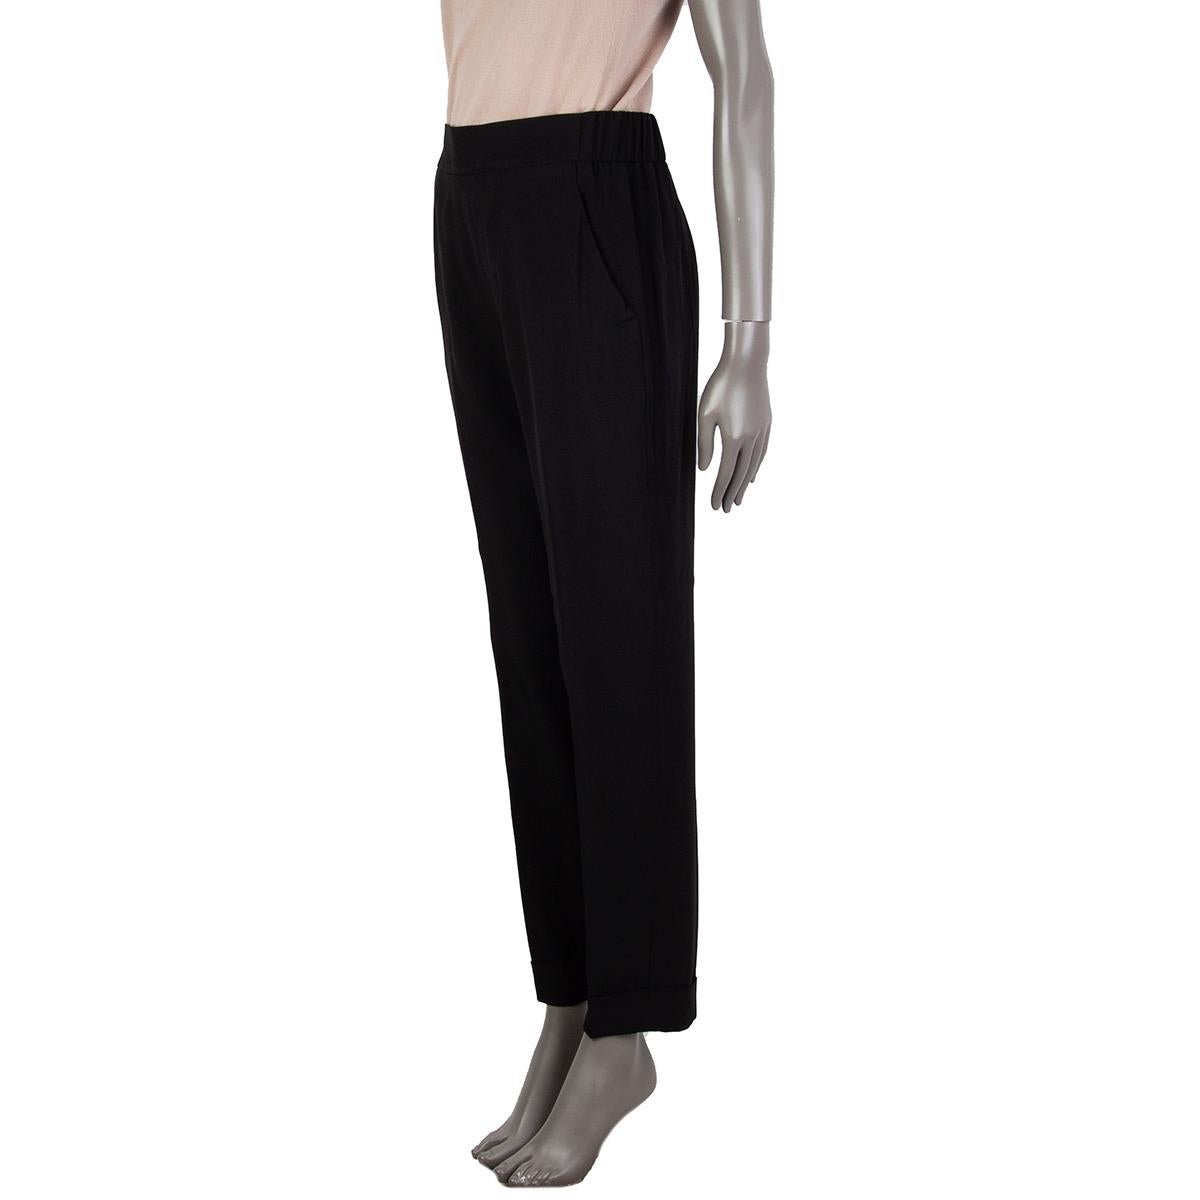 100% authentic Akris tapered pants in black acetate (52%) viscose (48%) with an elastic stretch-waistband in the back, slit-pockets on both sides, casual fit to slip on. Unlined. Has been worn and is in excellent condition. 

Measurements
Tag